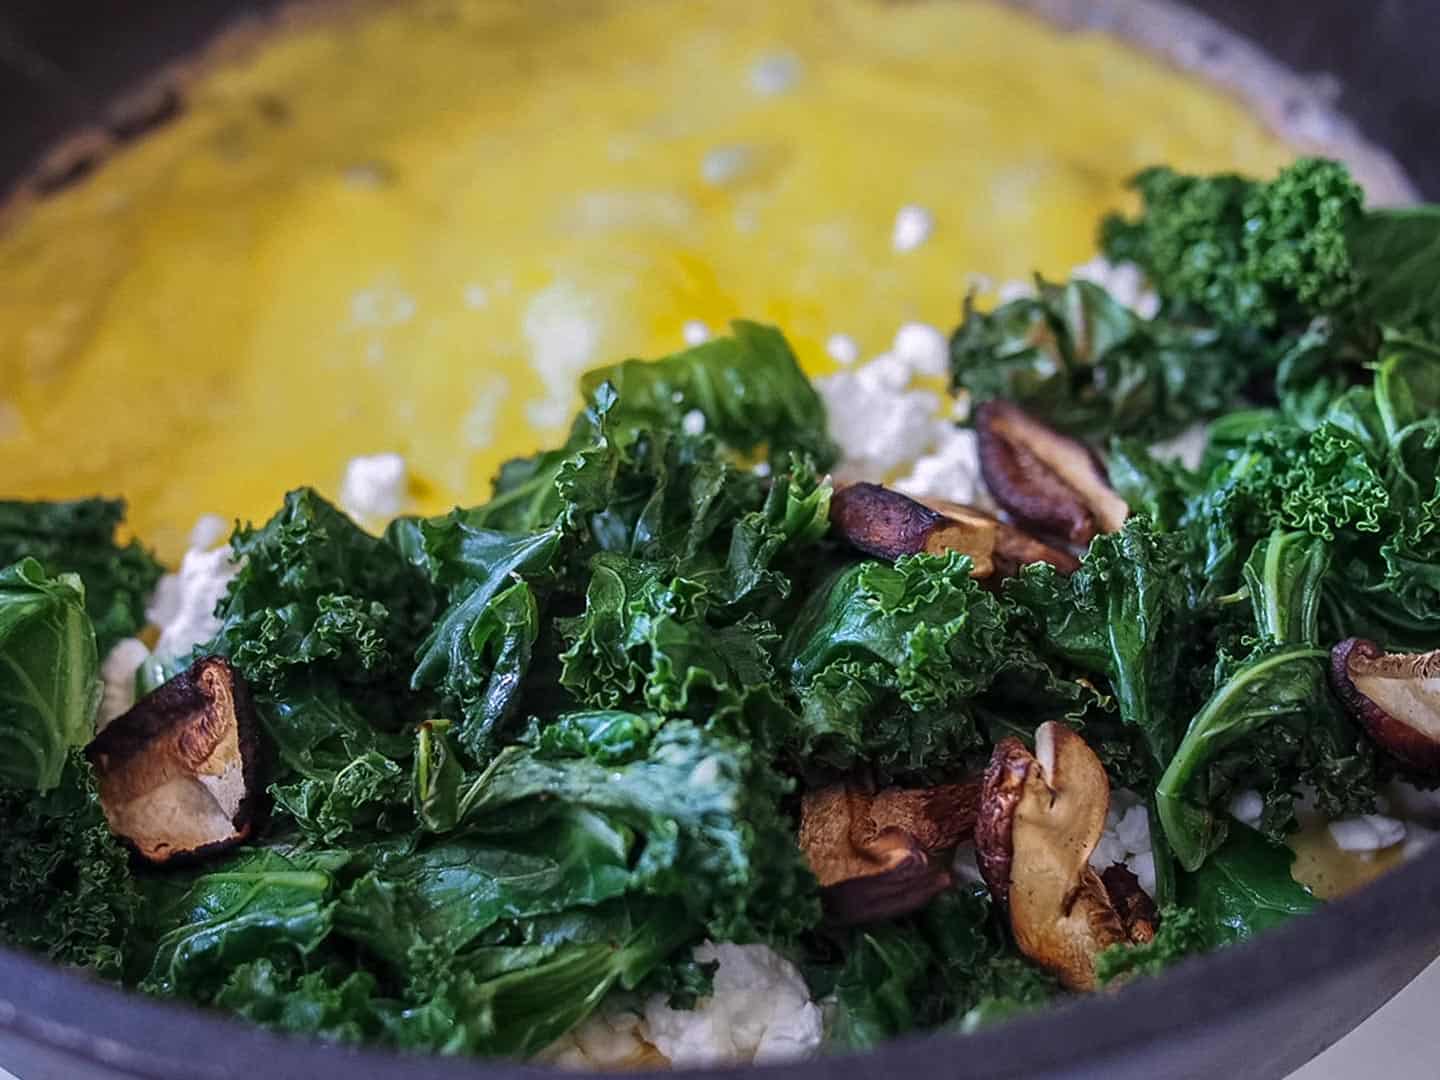 Kale mushrooms and dry cottage cheese curds on omelette in pan